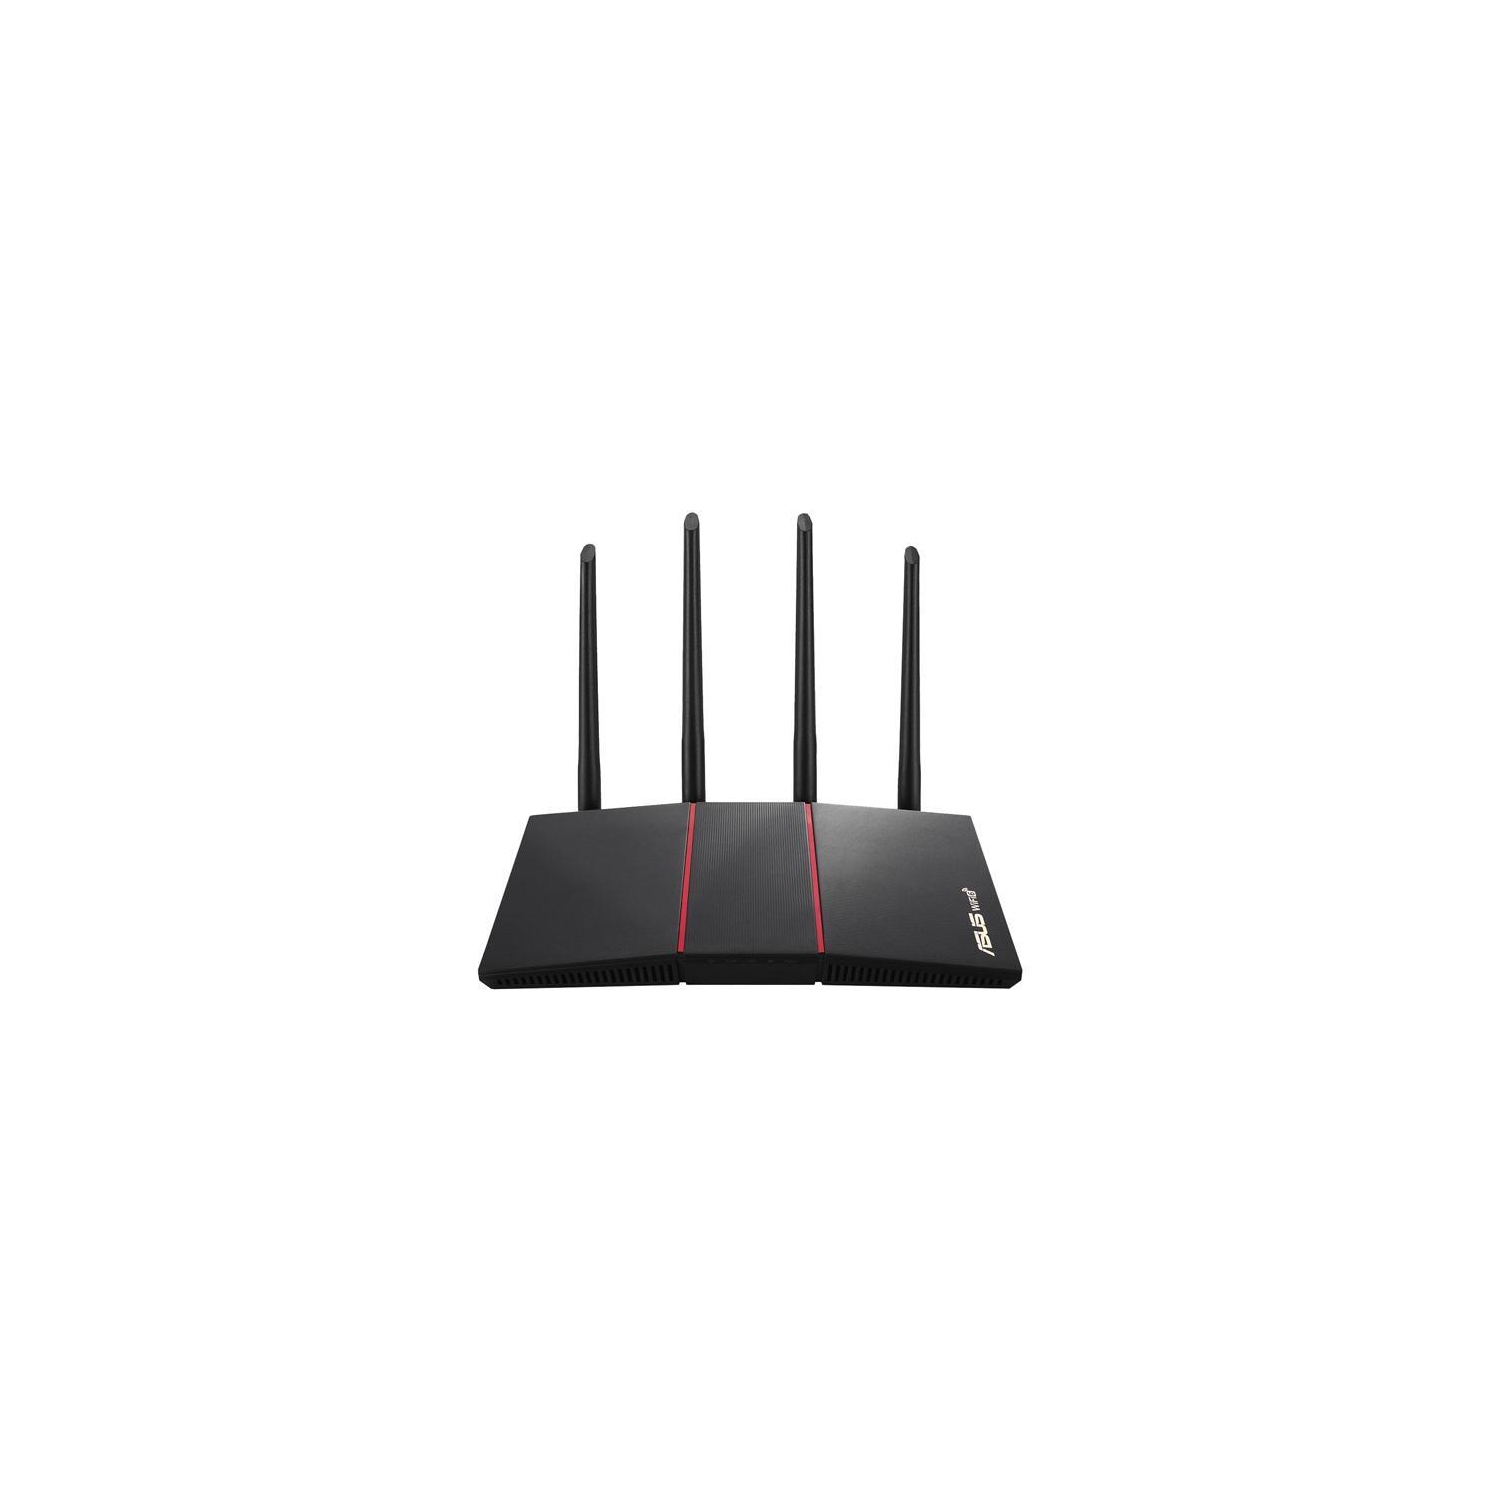 ASUS WIFI ROUTER AX1800 Dual Band 6 (802.11ax) Supporting MU-MIMO and OFDMA technology, with AiProtection Classic Network Security, Compatible with ASUS AiMesh System RT-AX55/CA(Black)